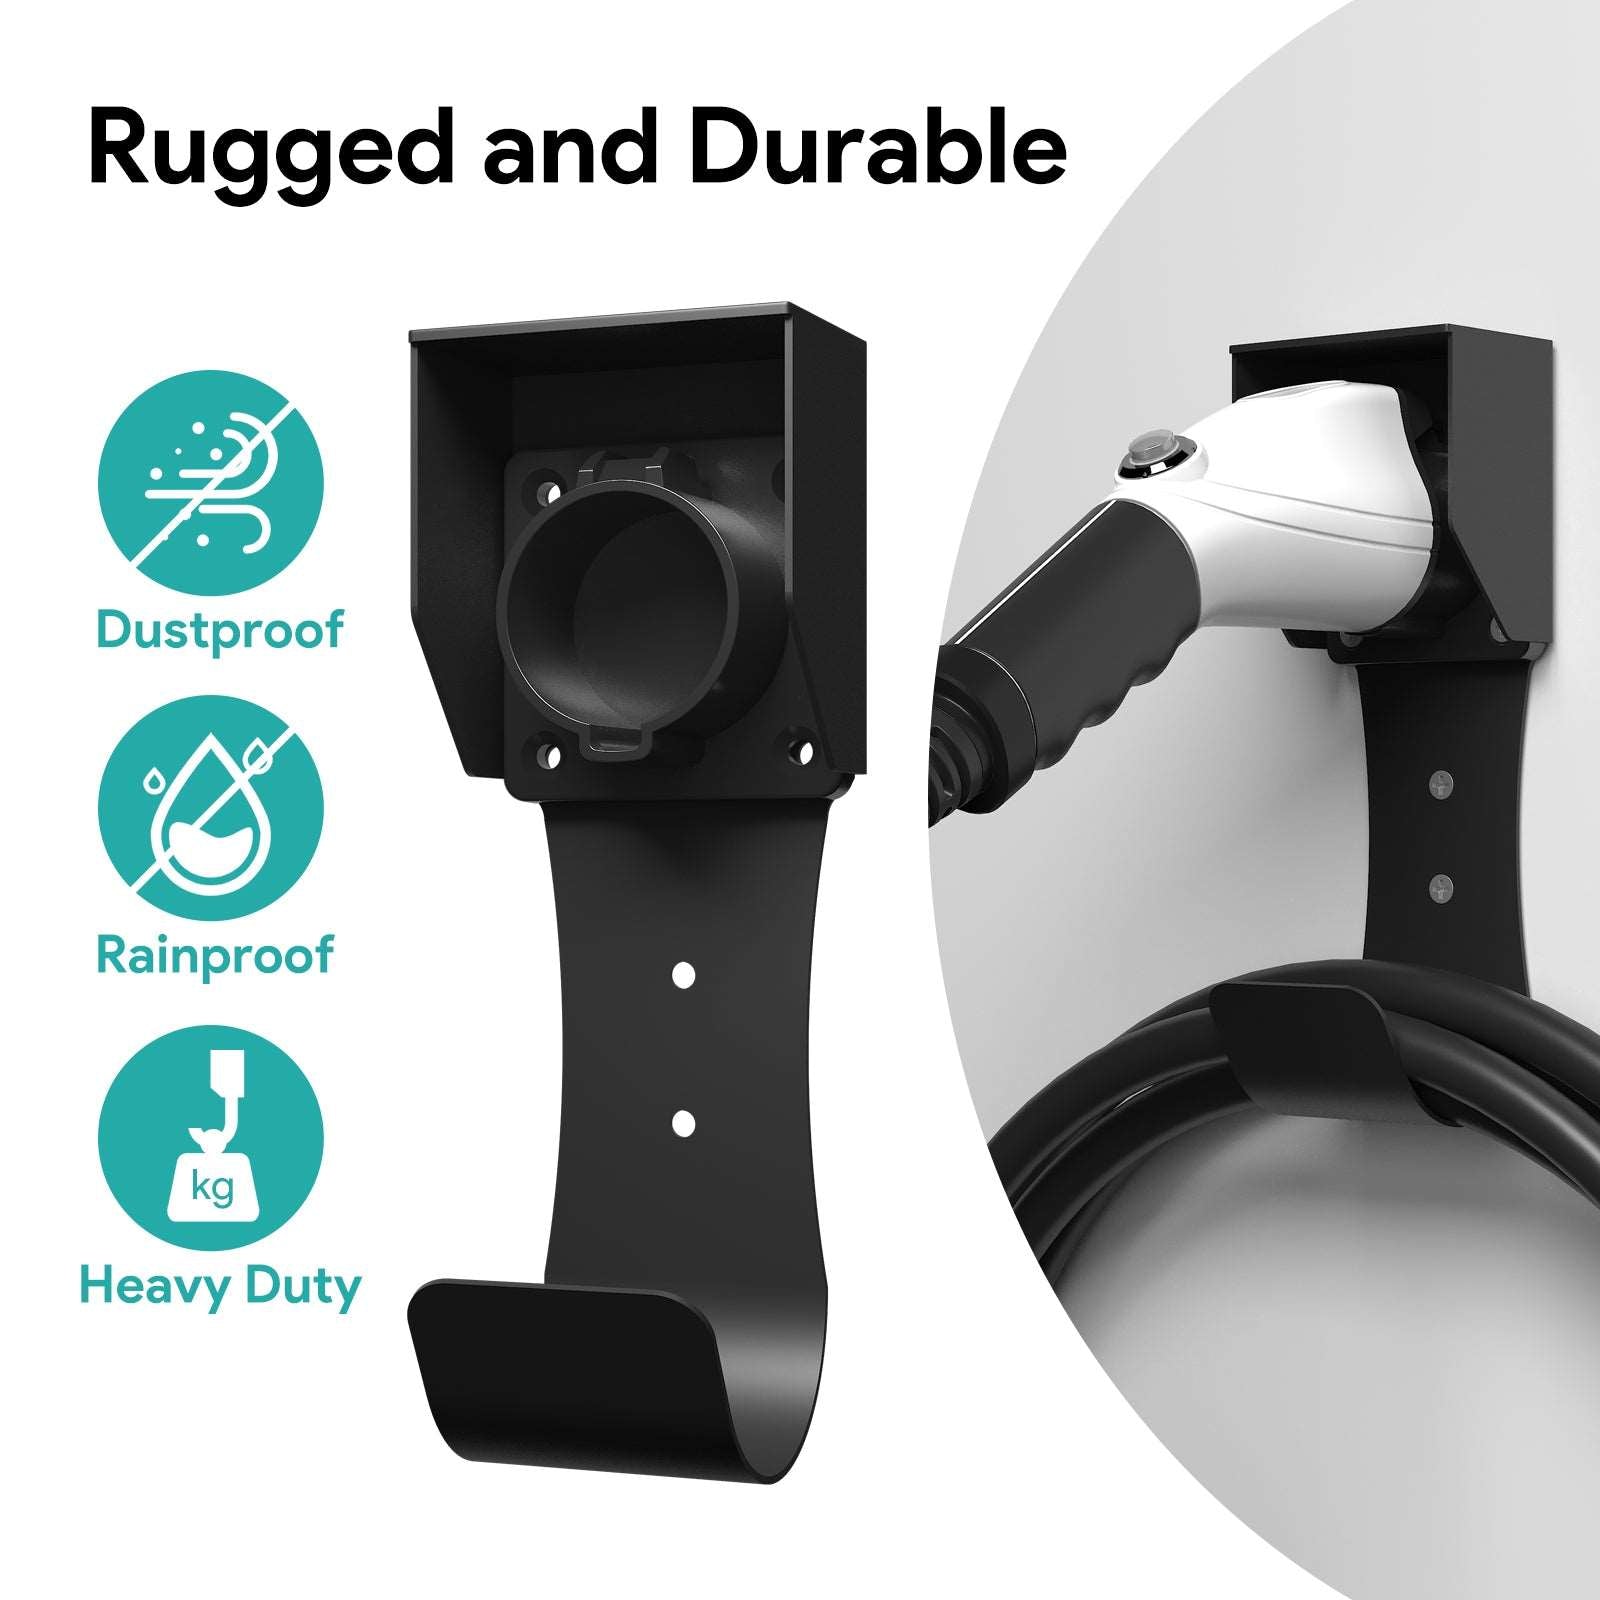 Heavy duty combination with steel and plastic material can hold your EV Charger steady